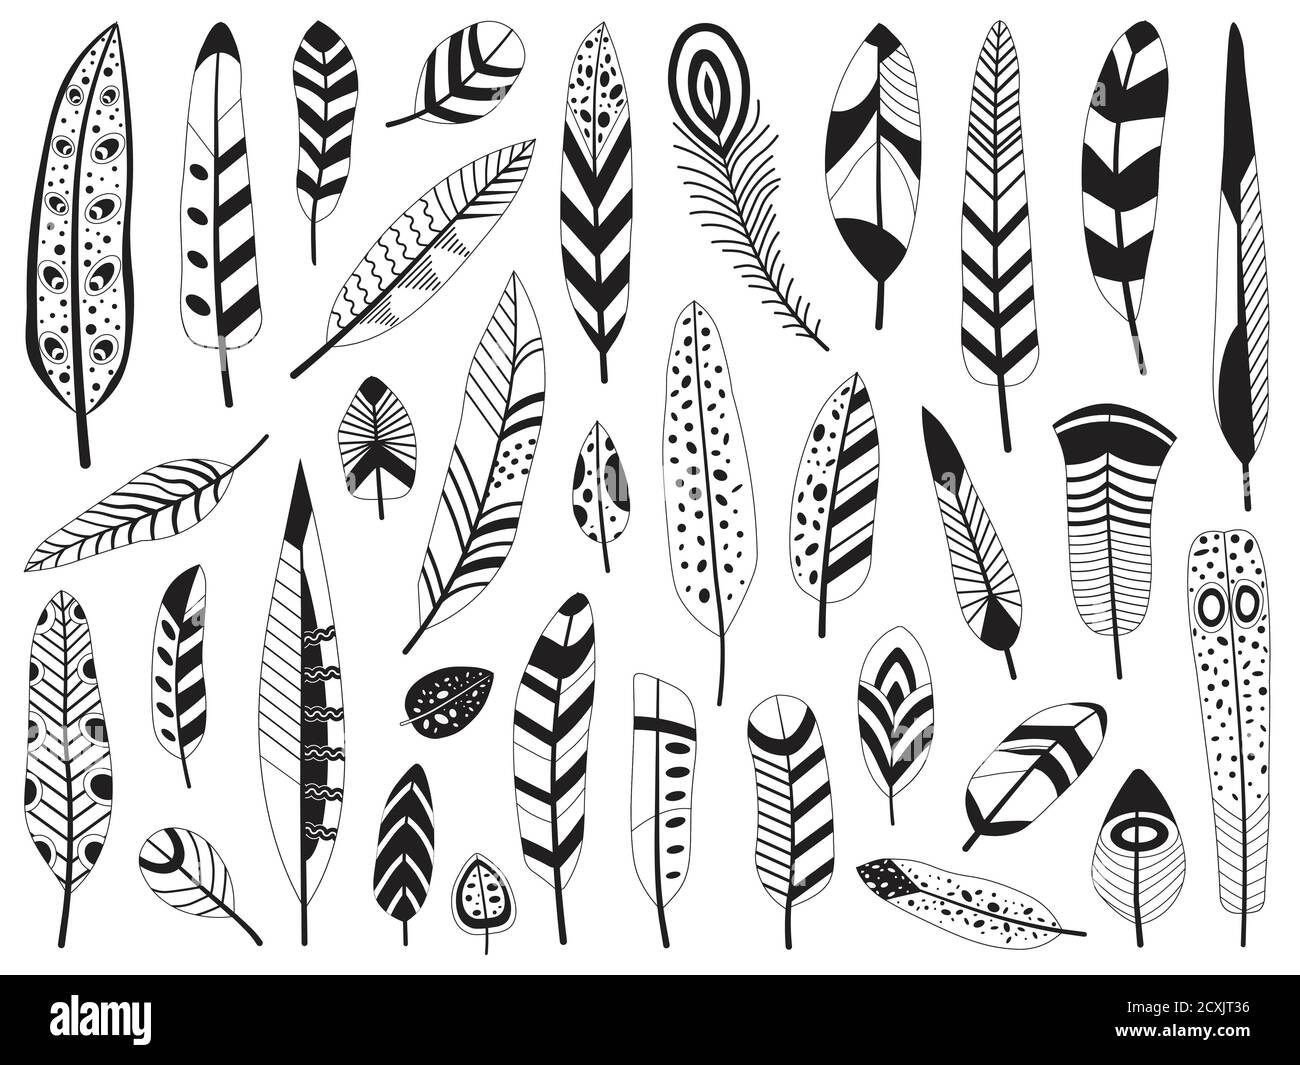 Black and White Bird Feather Silhouettes Set Stock Vector